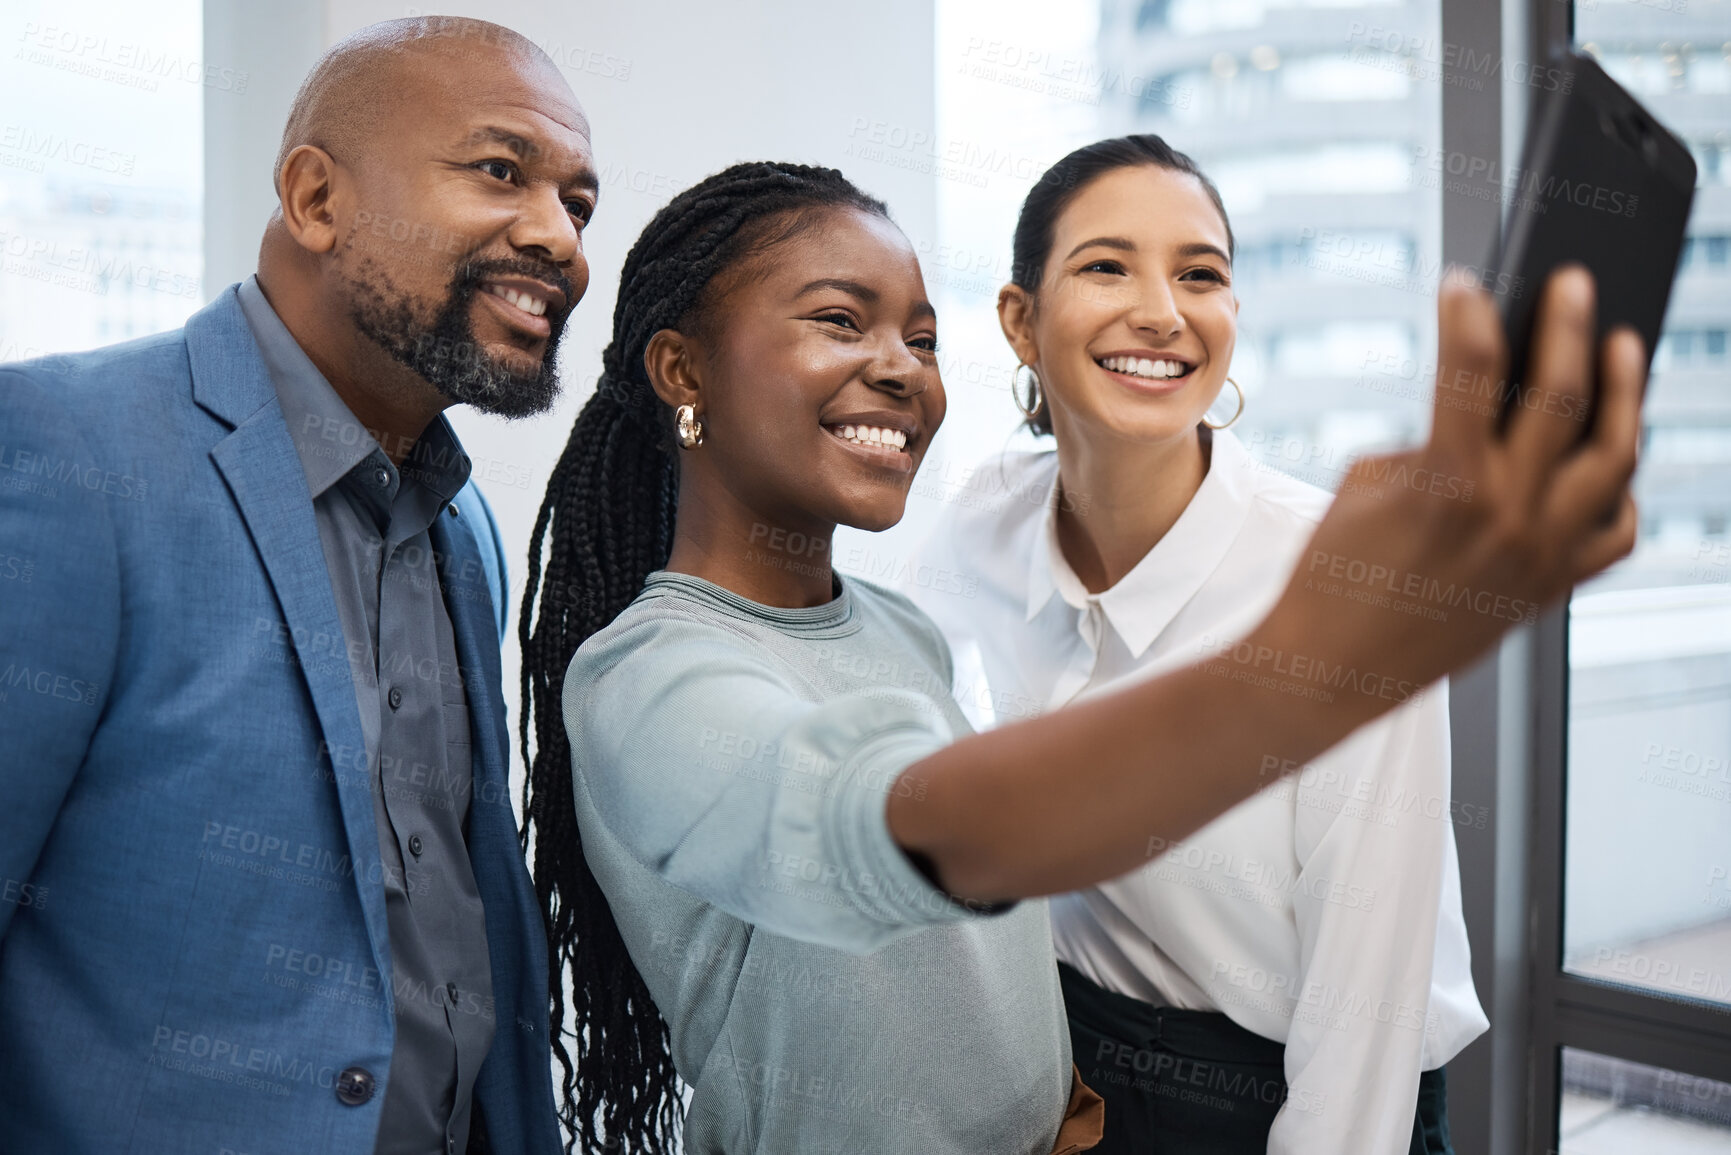 Buy stock photo Shot of a group of businesspeople taking selfies together in an office